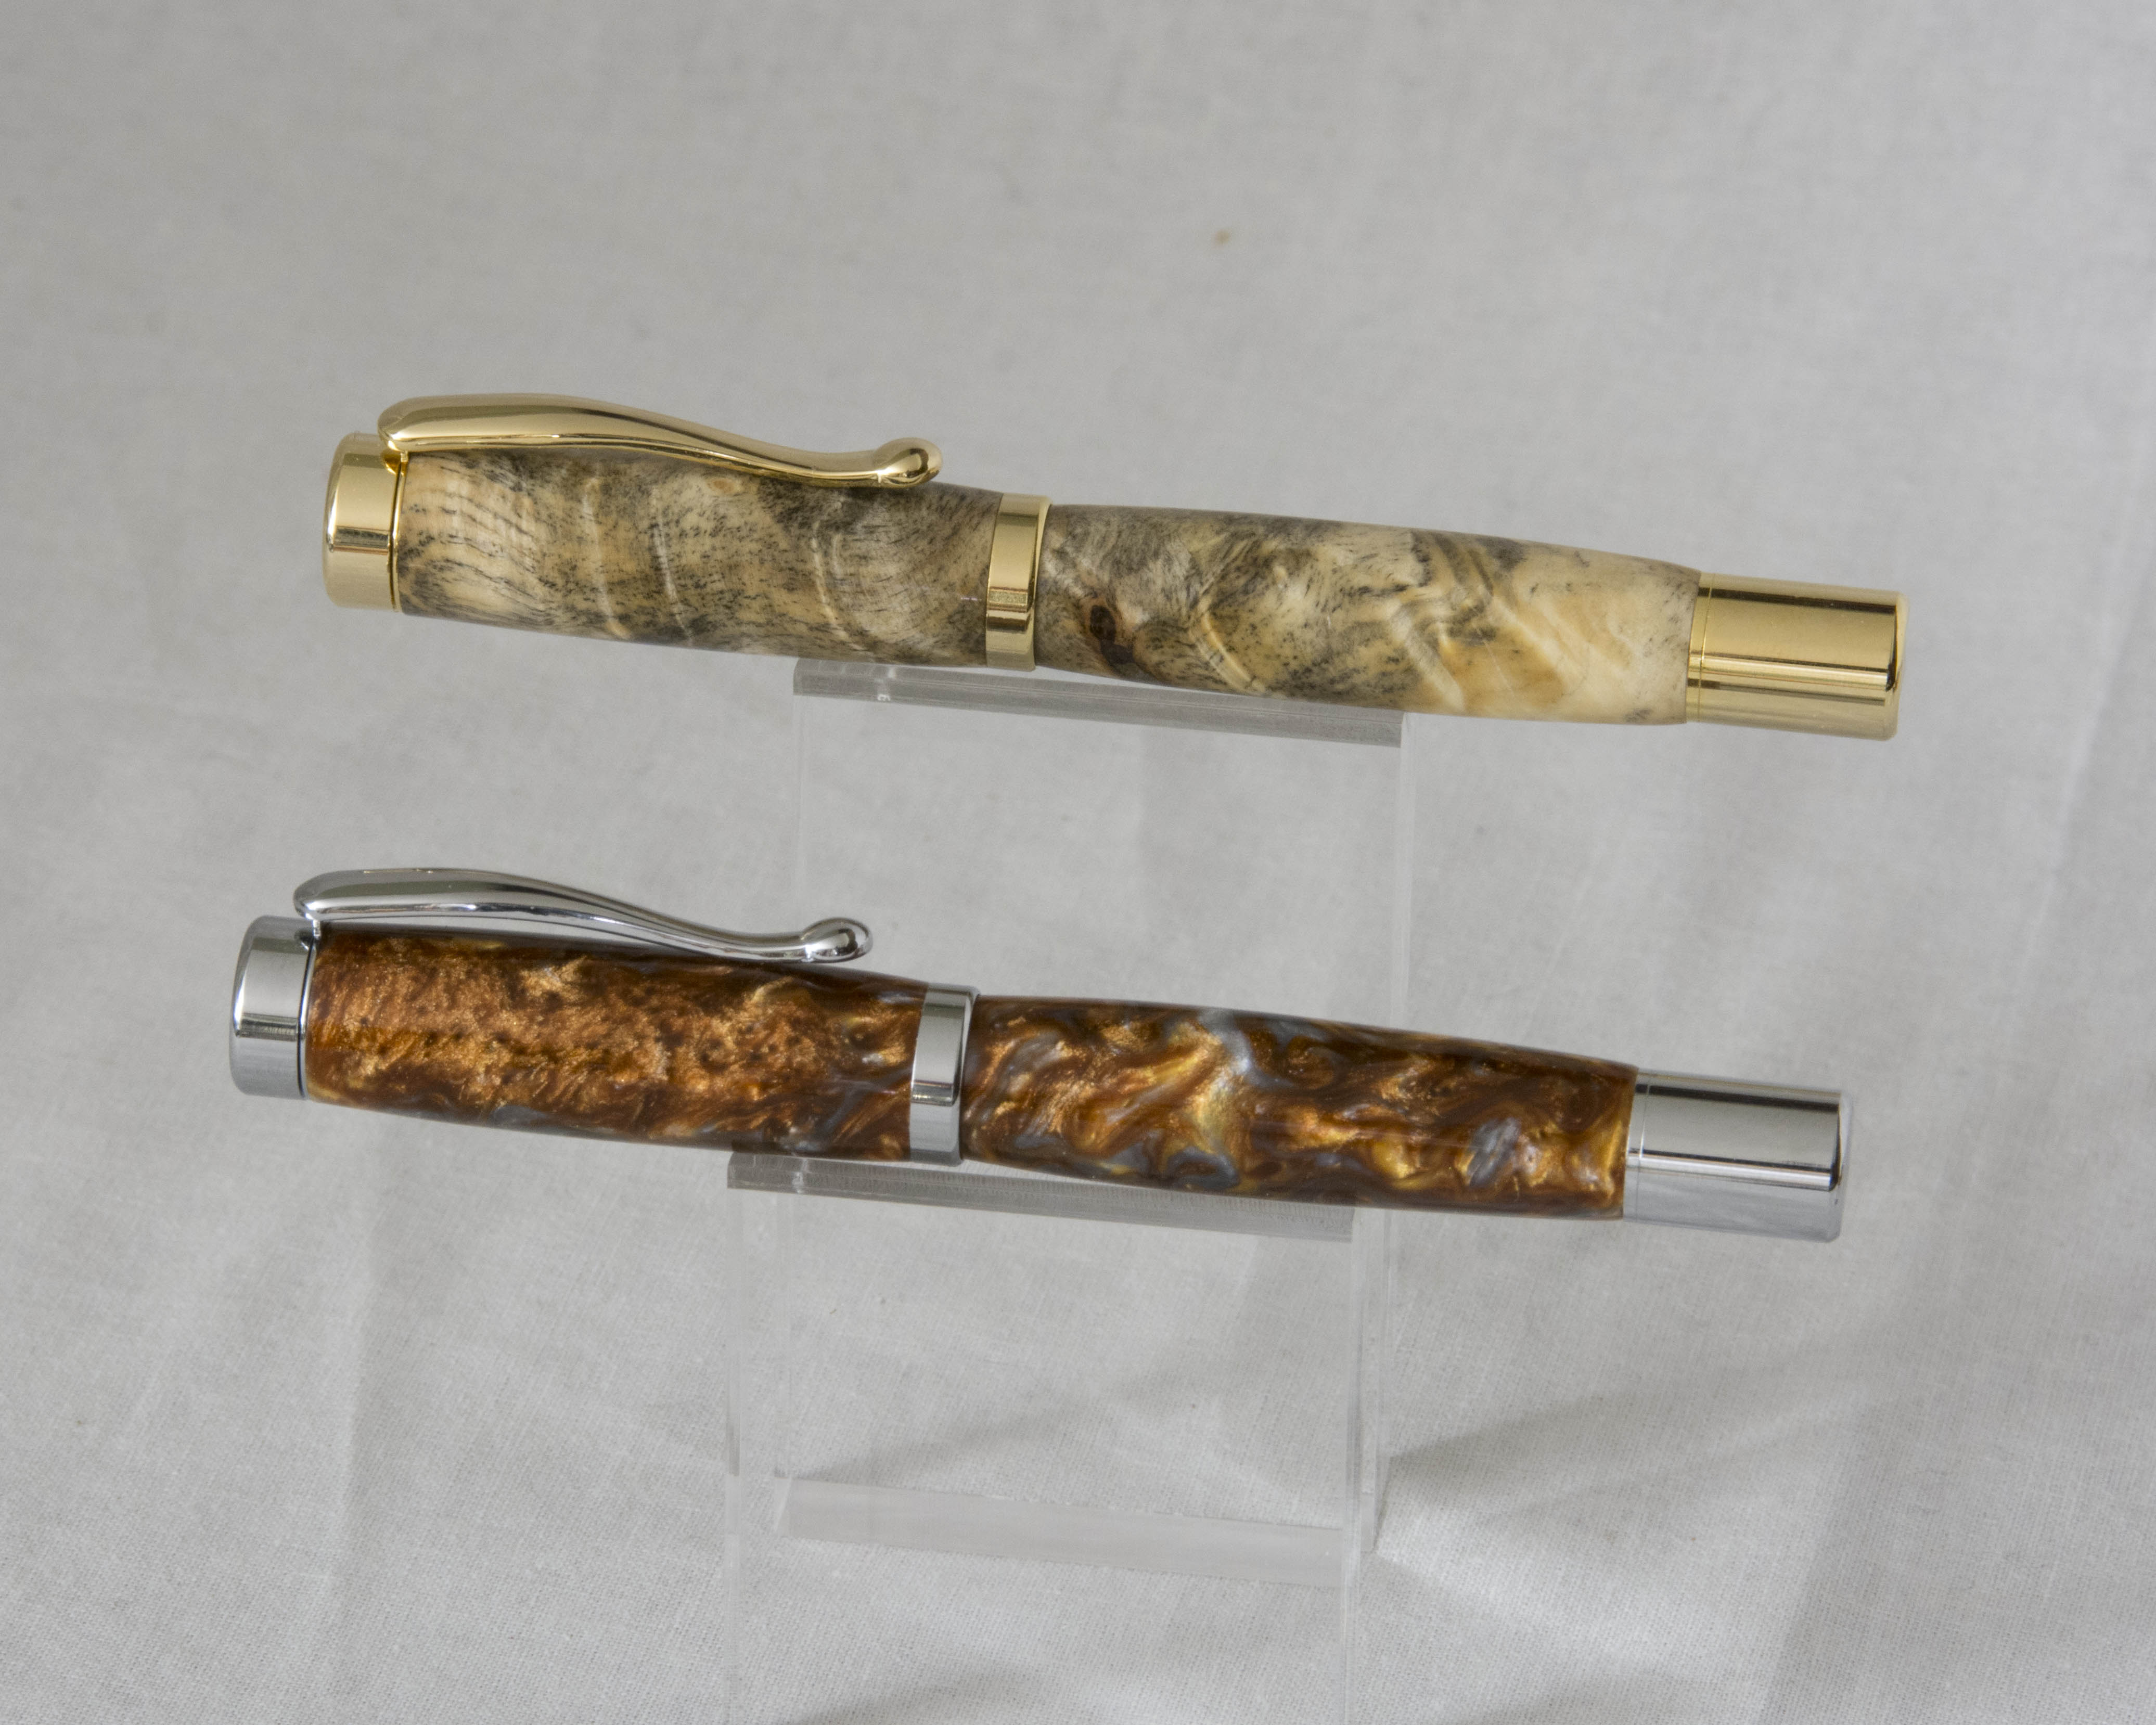 One Roller Ball and Two Fountain Pen from Woodcraft